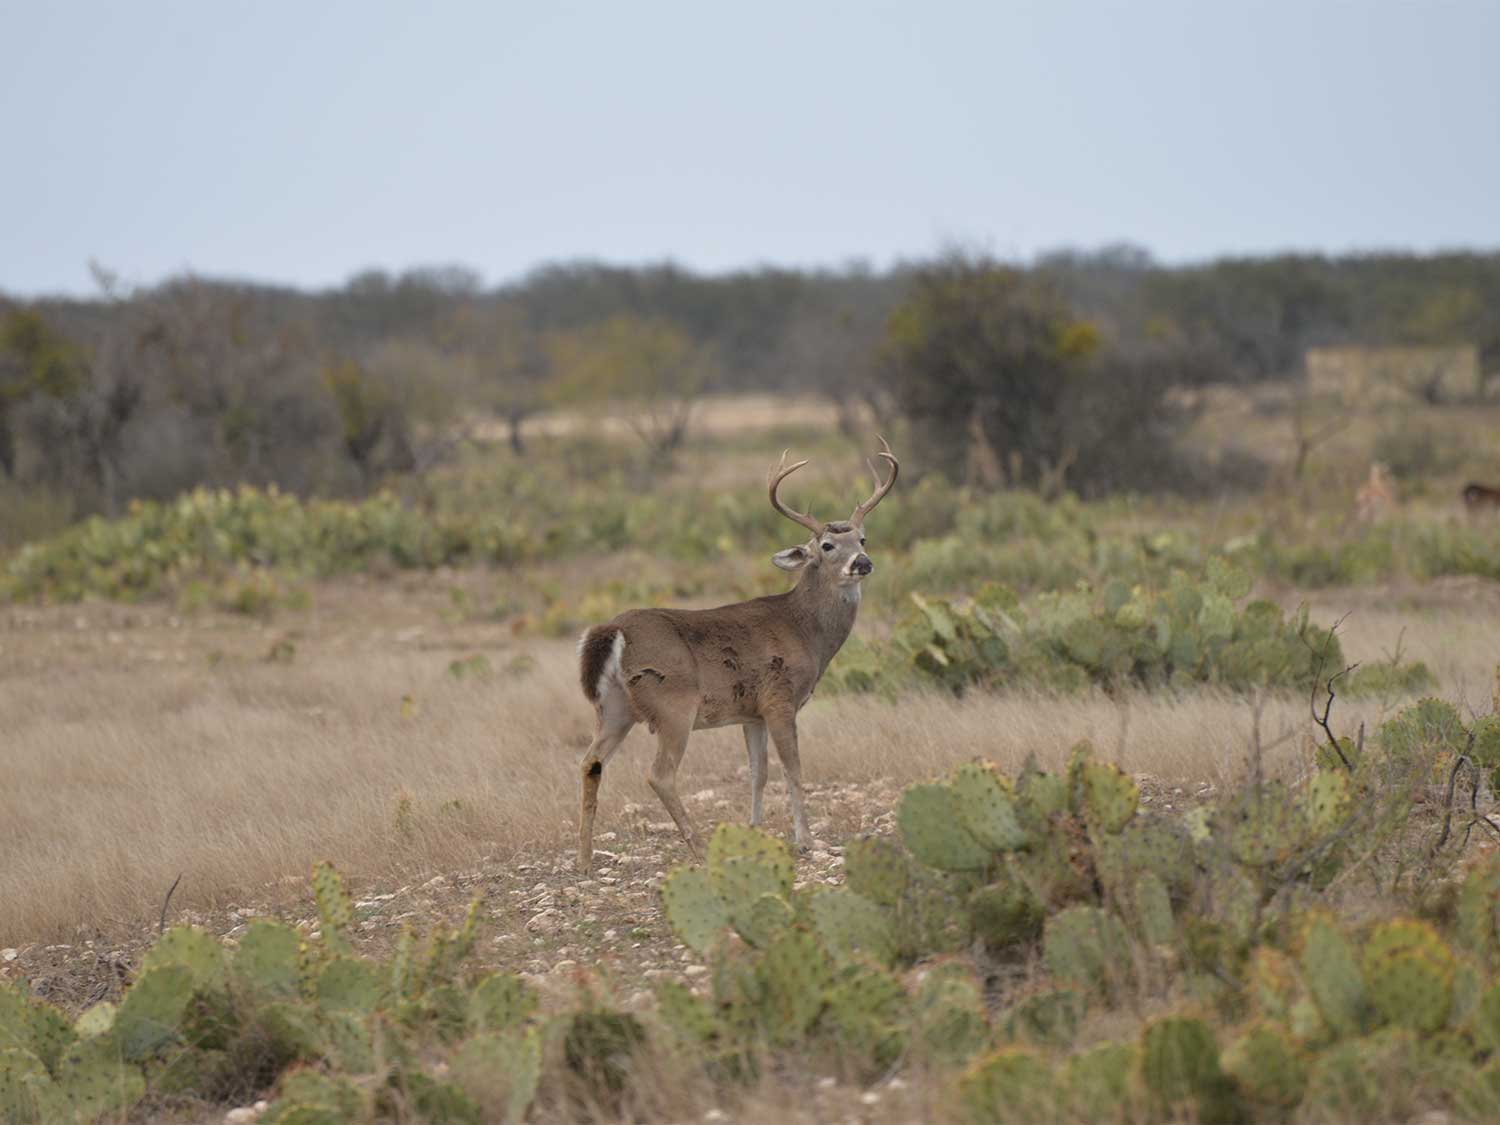 A whiitetail buck walks through a large open field surrounded by cactuses.